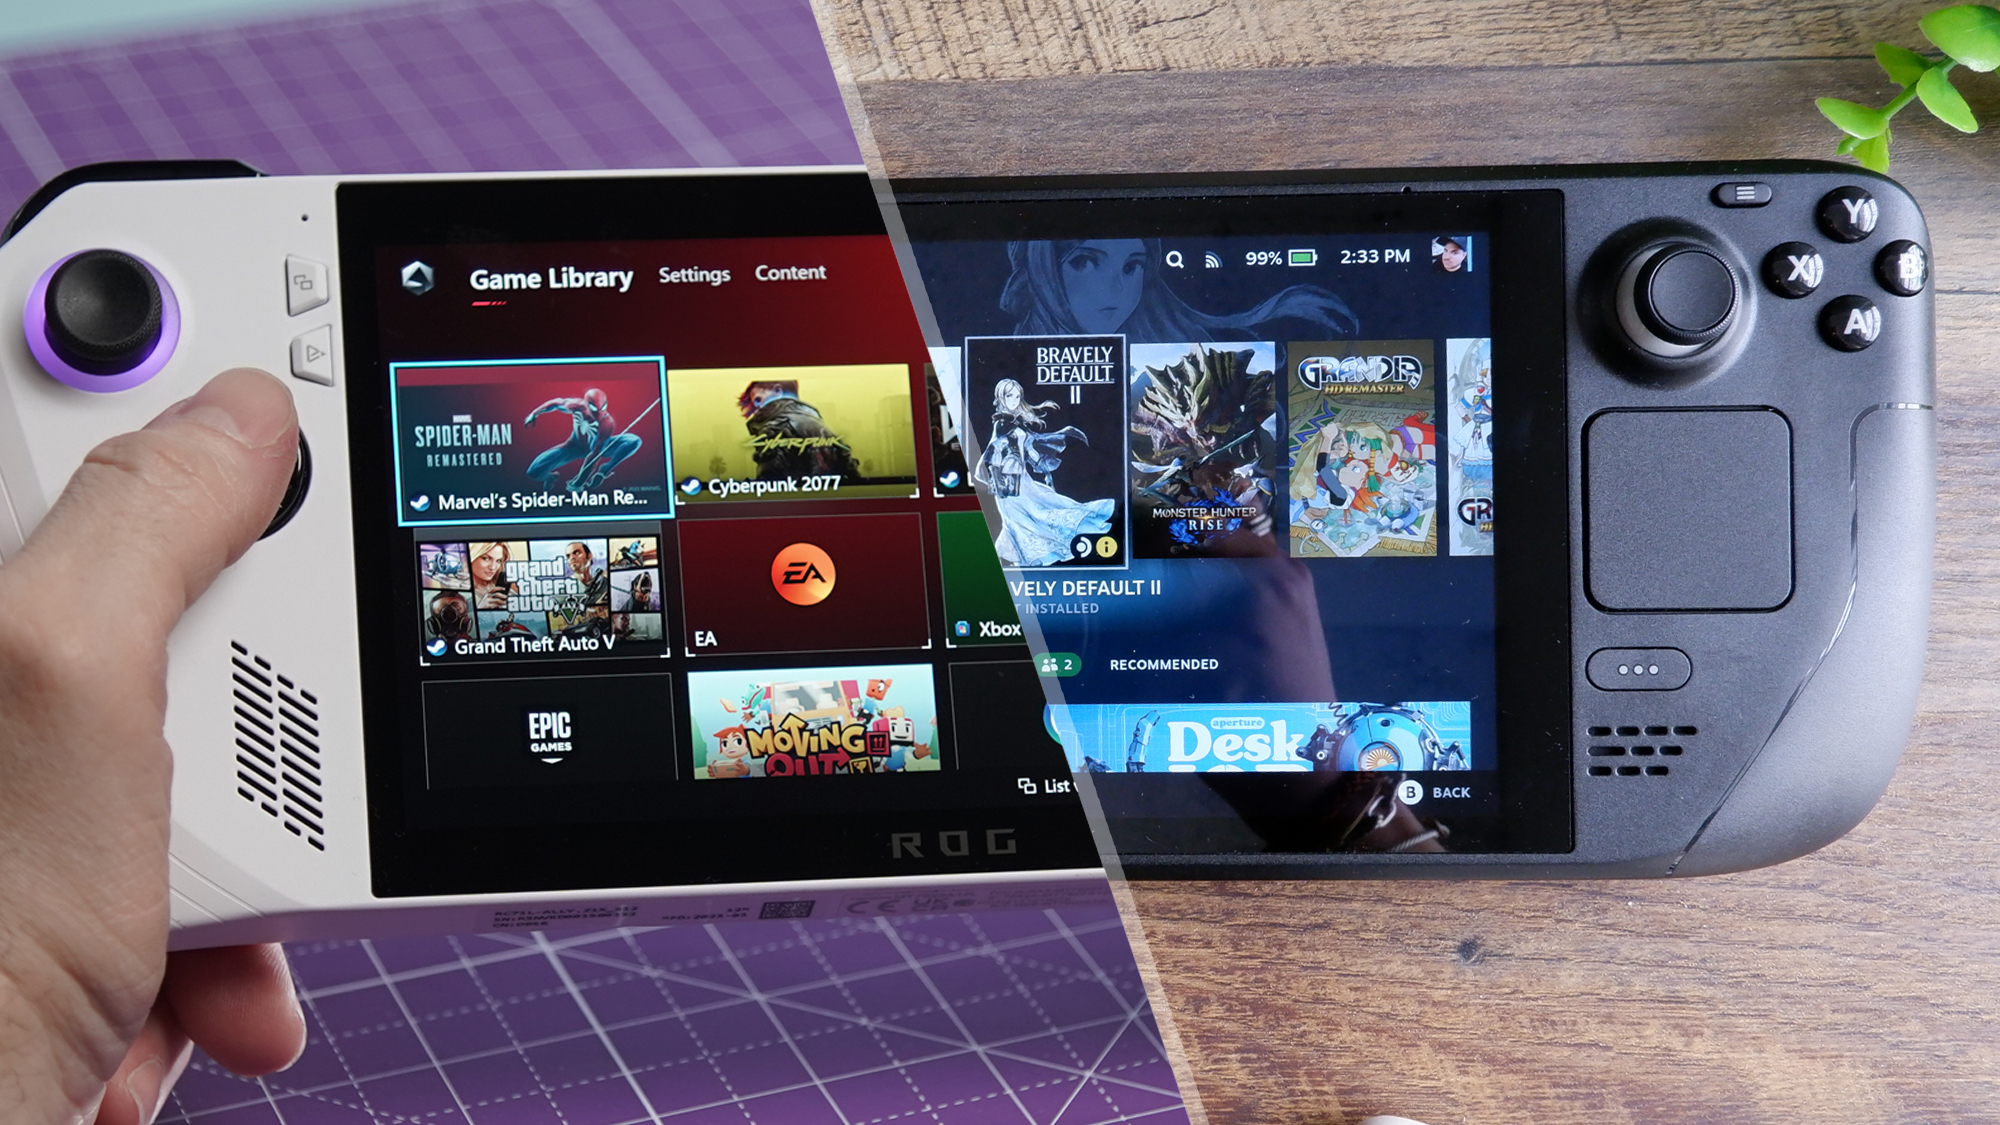 Asus ROG Ally vs Steam Deck: Which handheld wins?